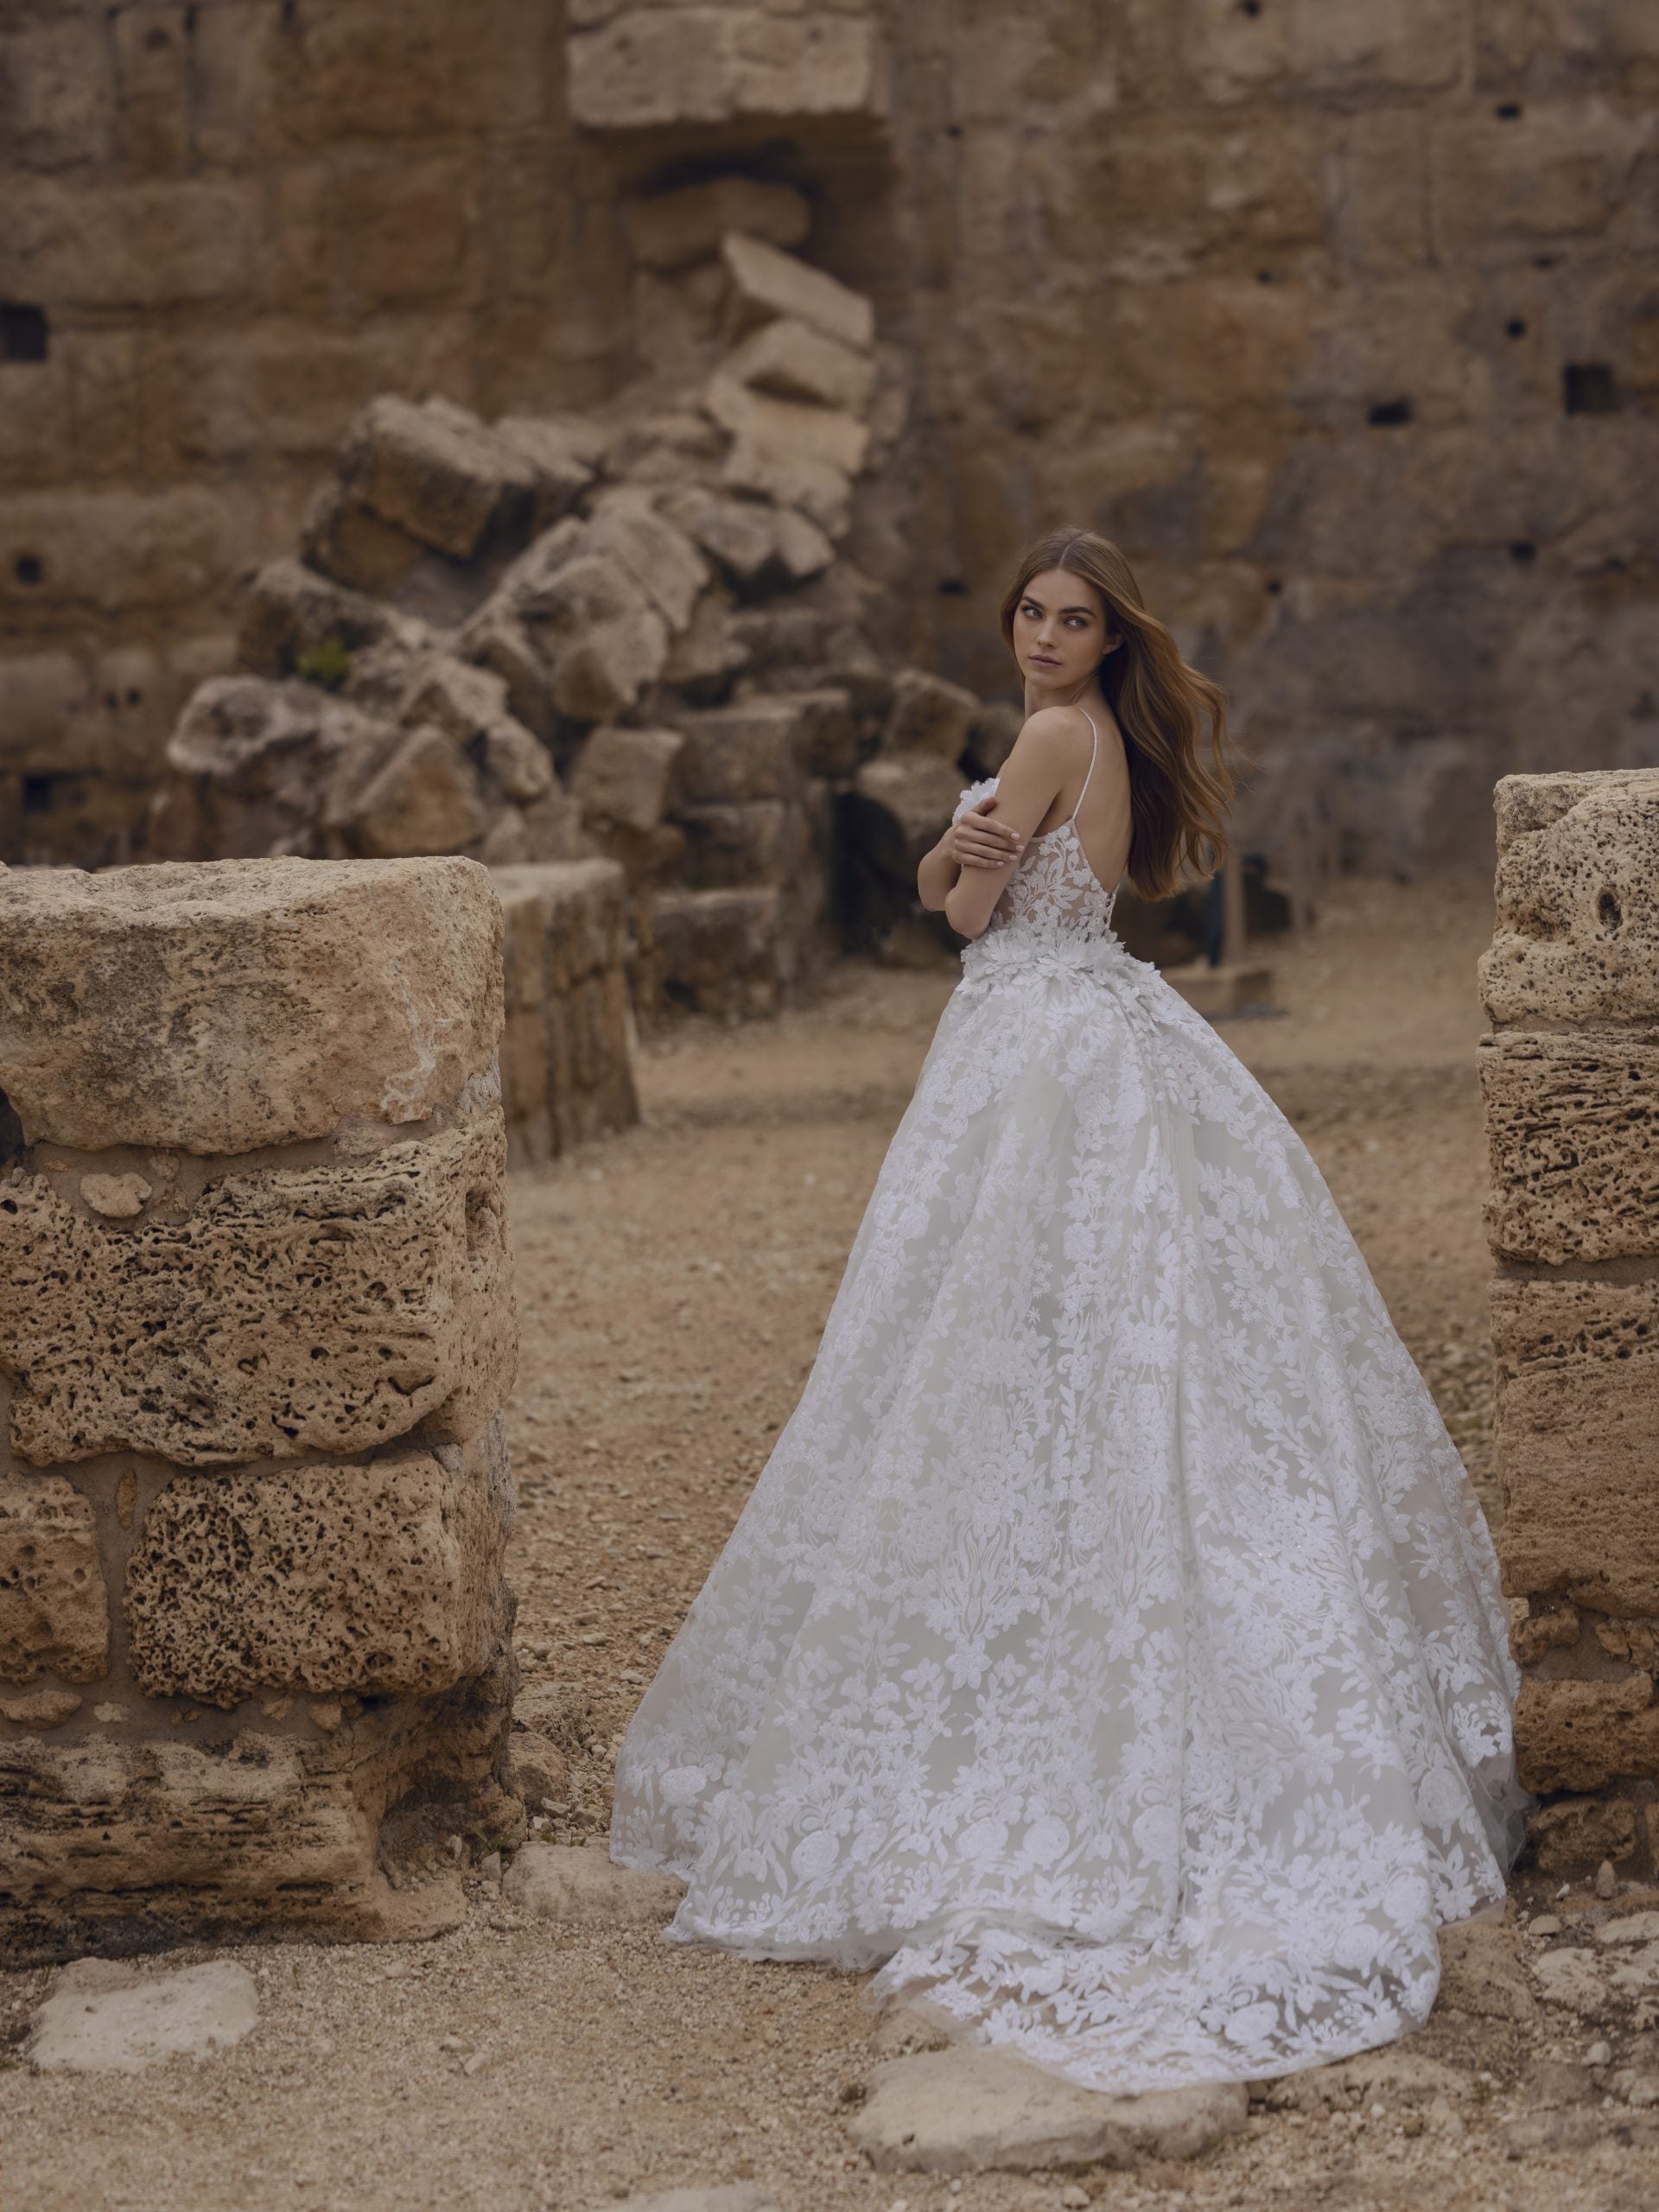 Lace Ball Gown Wedding Dress With Sweetheart Neckline by Love by Pnina Tornai - Image 2